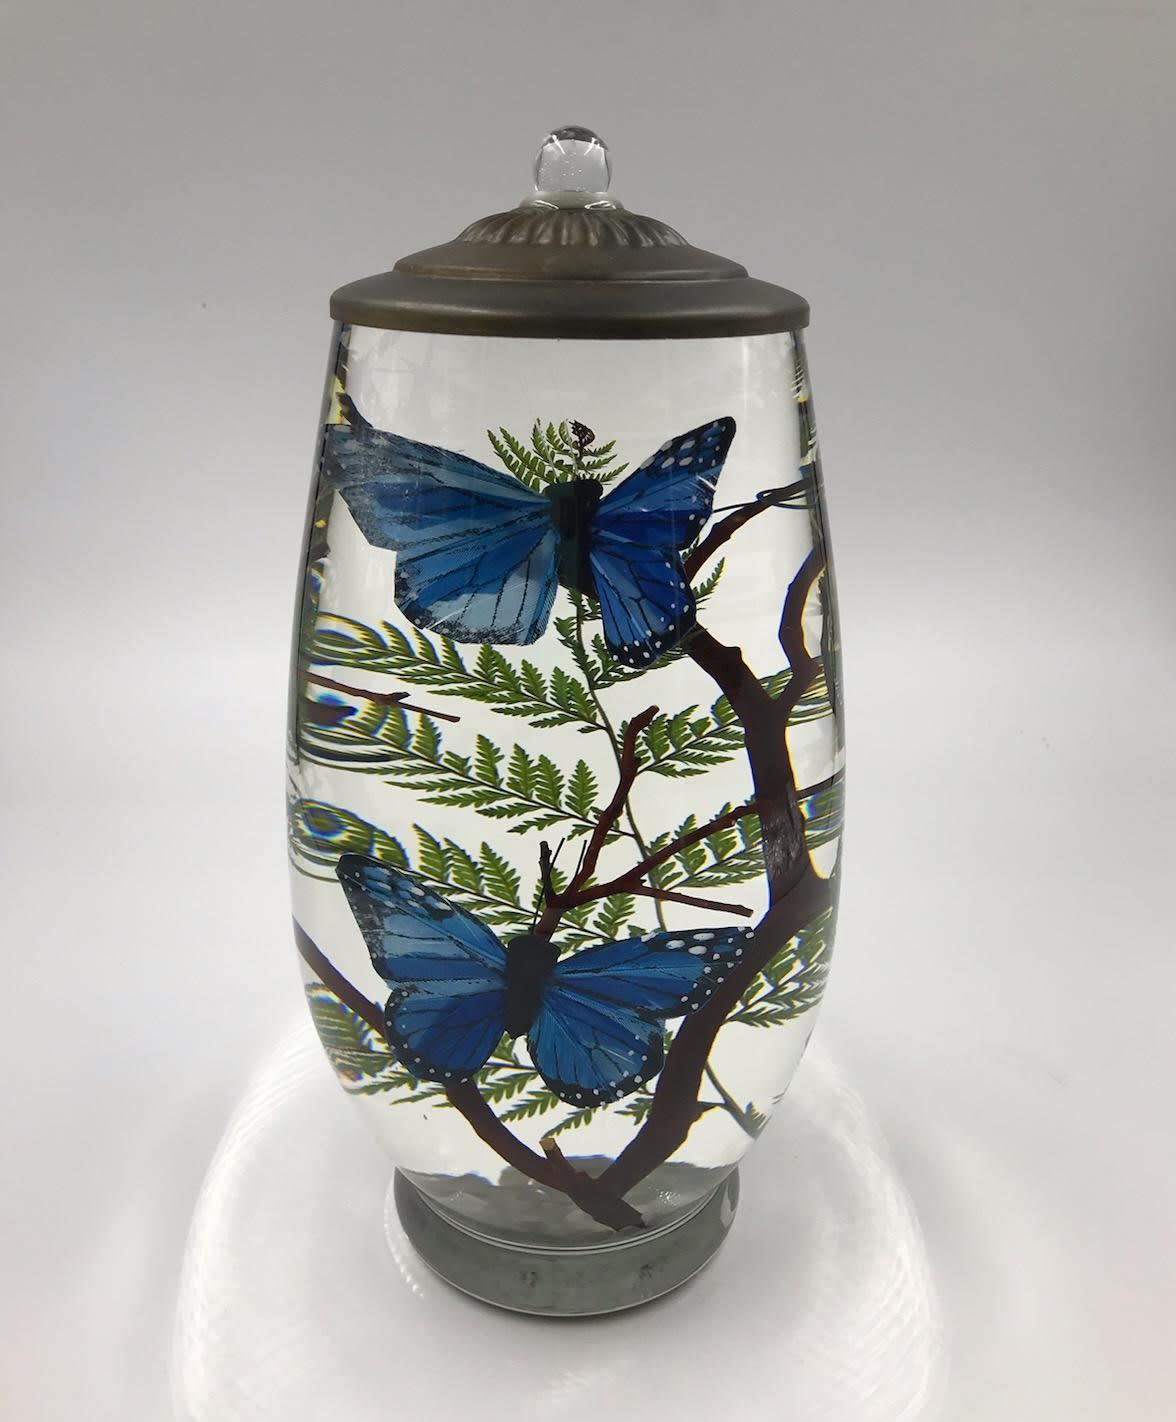 Brandy Lifetime Candle - Butterfly - This clean burning candle showcases two butterflies and makes a beautiful display even when it's not burning.  Candles comes complete with a fiberglass wick that never needs replaced and lasts year after year.    **Butterfly color based on availability - Blue, Orange or Purple  Lifetime Oil Candles are Refillable, Smokeless, Odorless and Handcrafted in the U.S.A. Burn Time Approx. 4 hours for every 1 oz.oil (Varies by Design &amp; Wick Length)